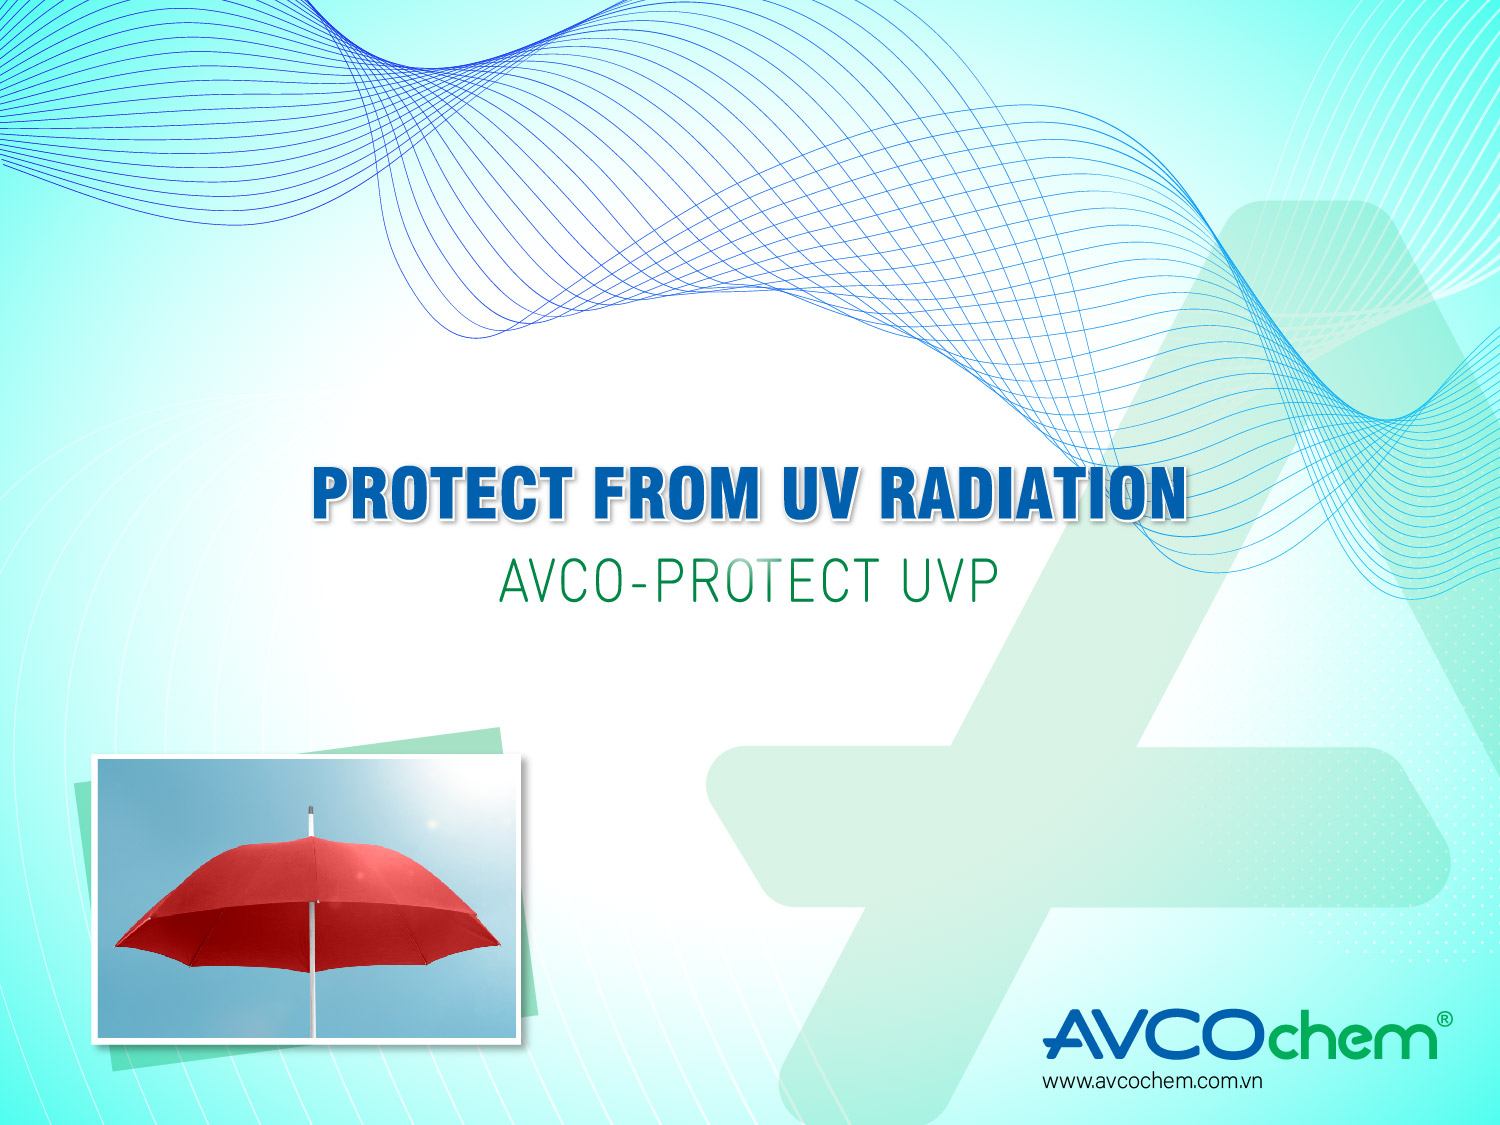 PROTECT FROM UV RADIATION